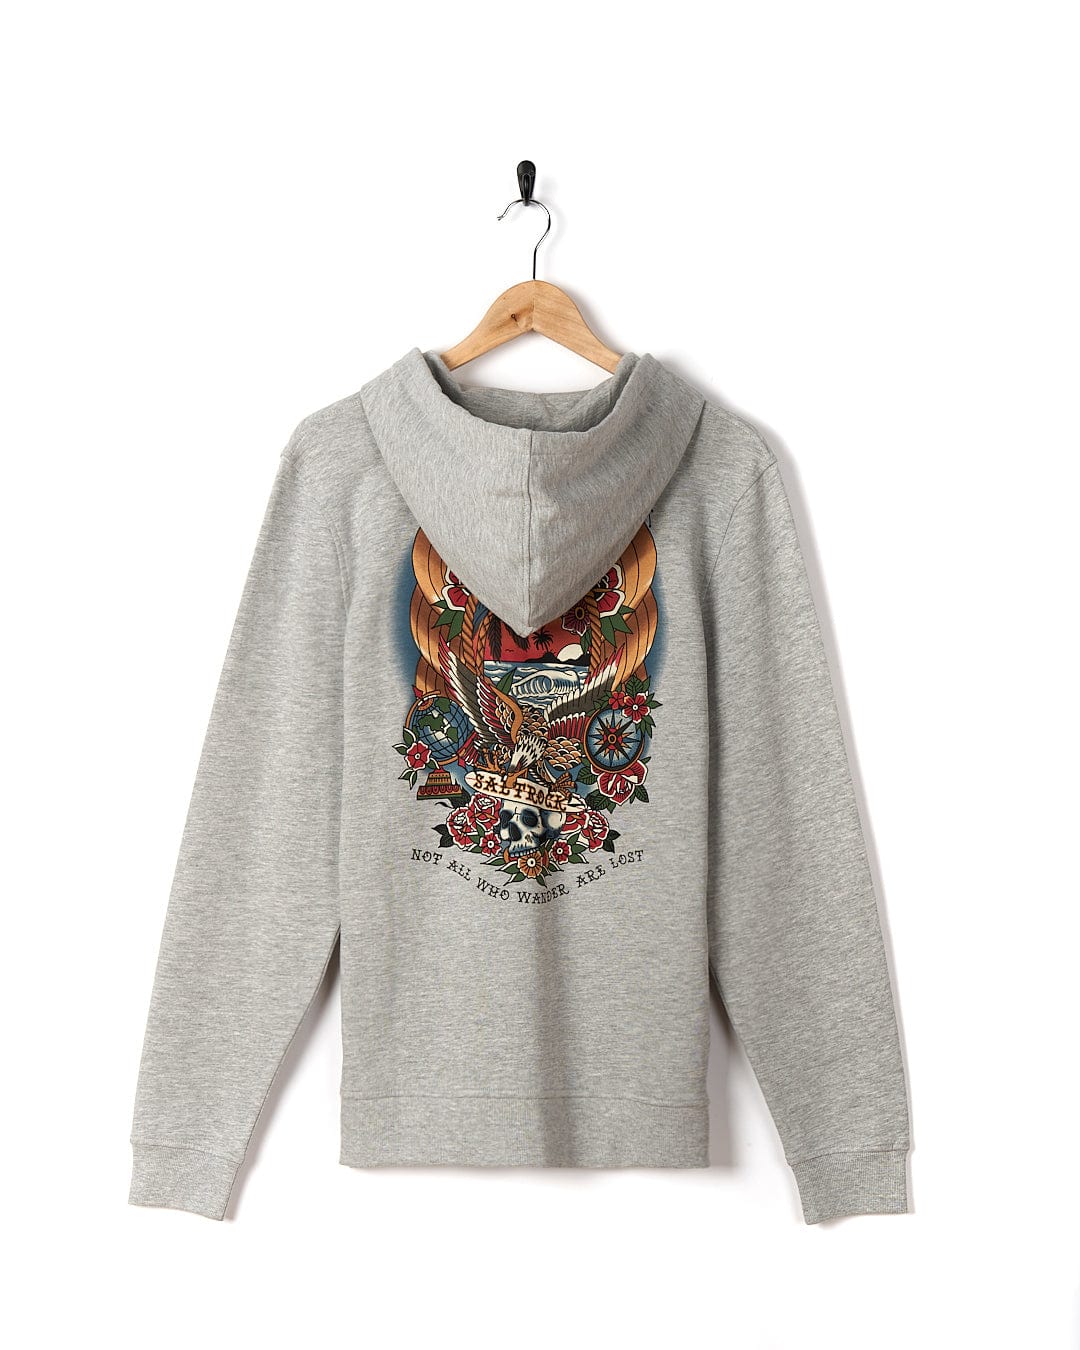 A Tattoo Island - Mens Zip Hoodie - Grey with an image of an eagle on it from Saltrock.